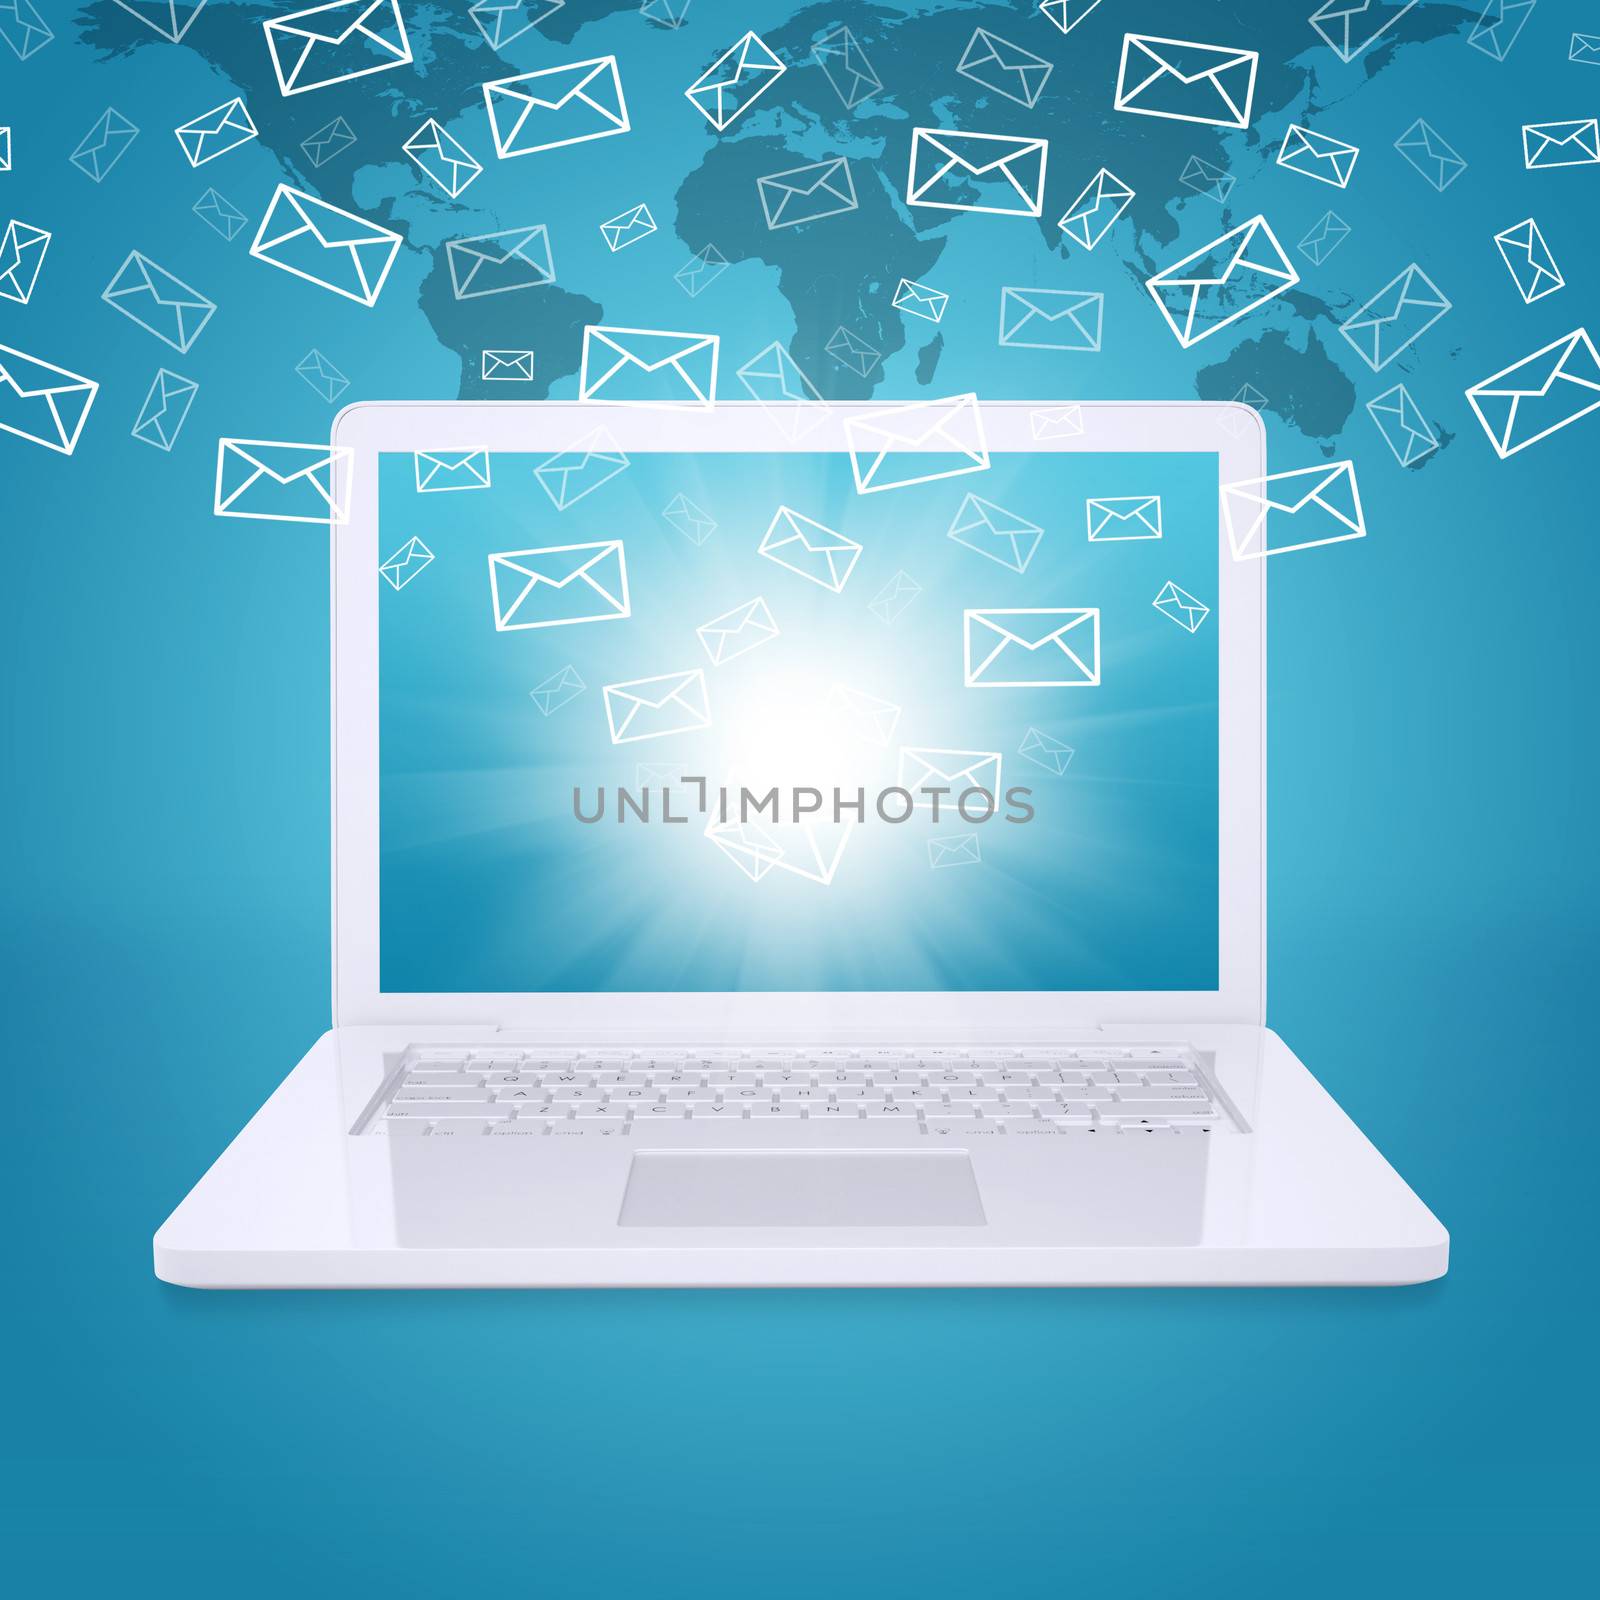 Emails fly out of laptop screen. The concept of e-mailing